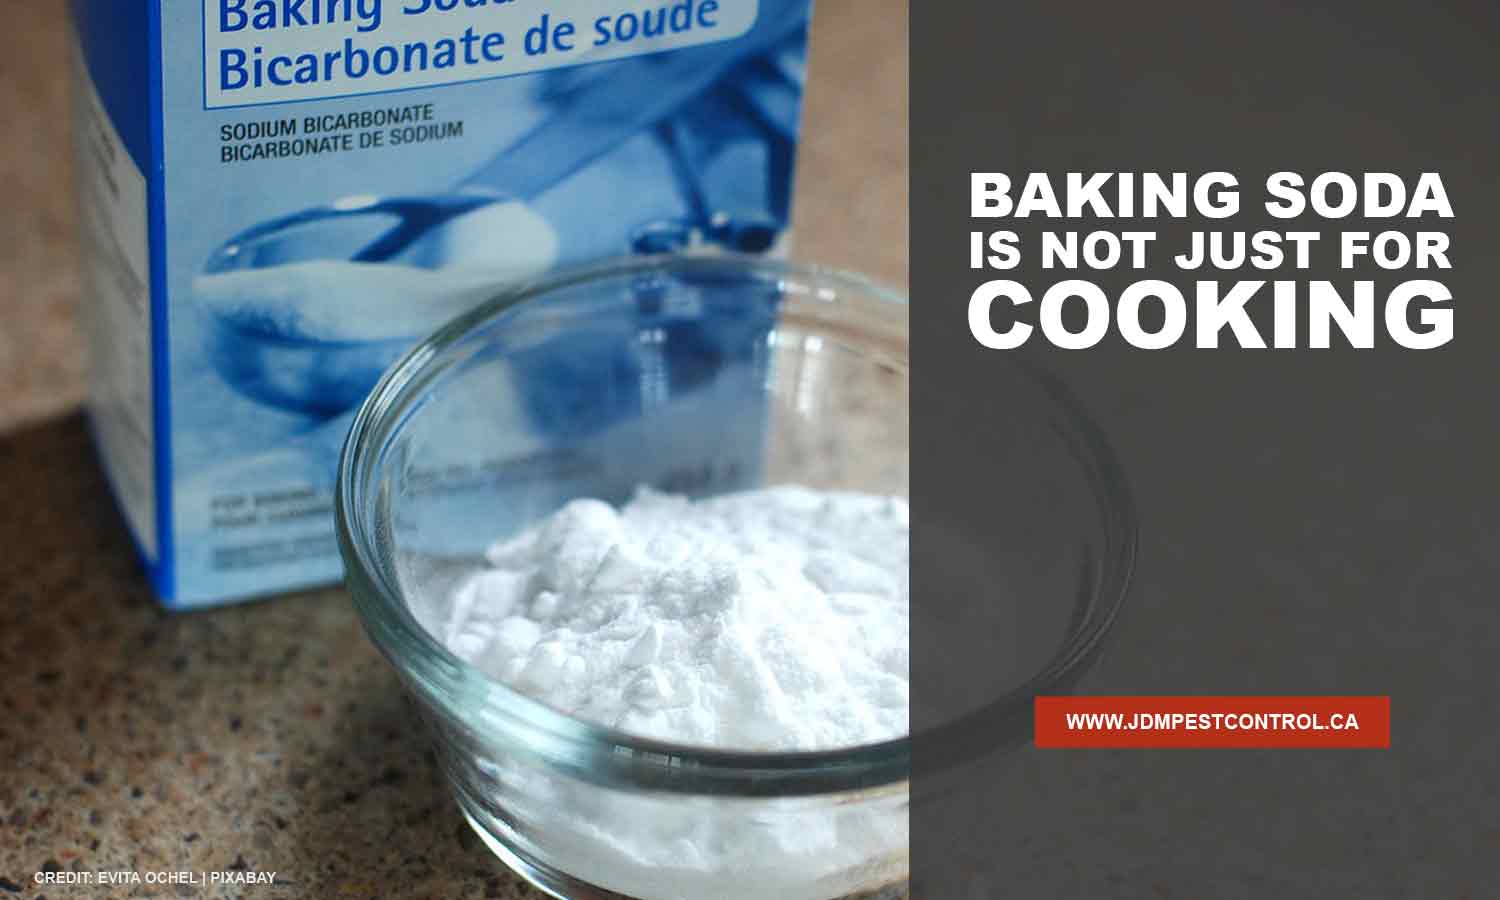 Baking soda is not just for cooking